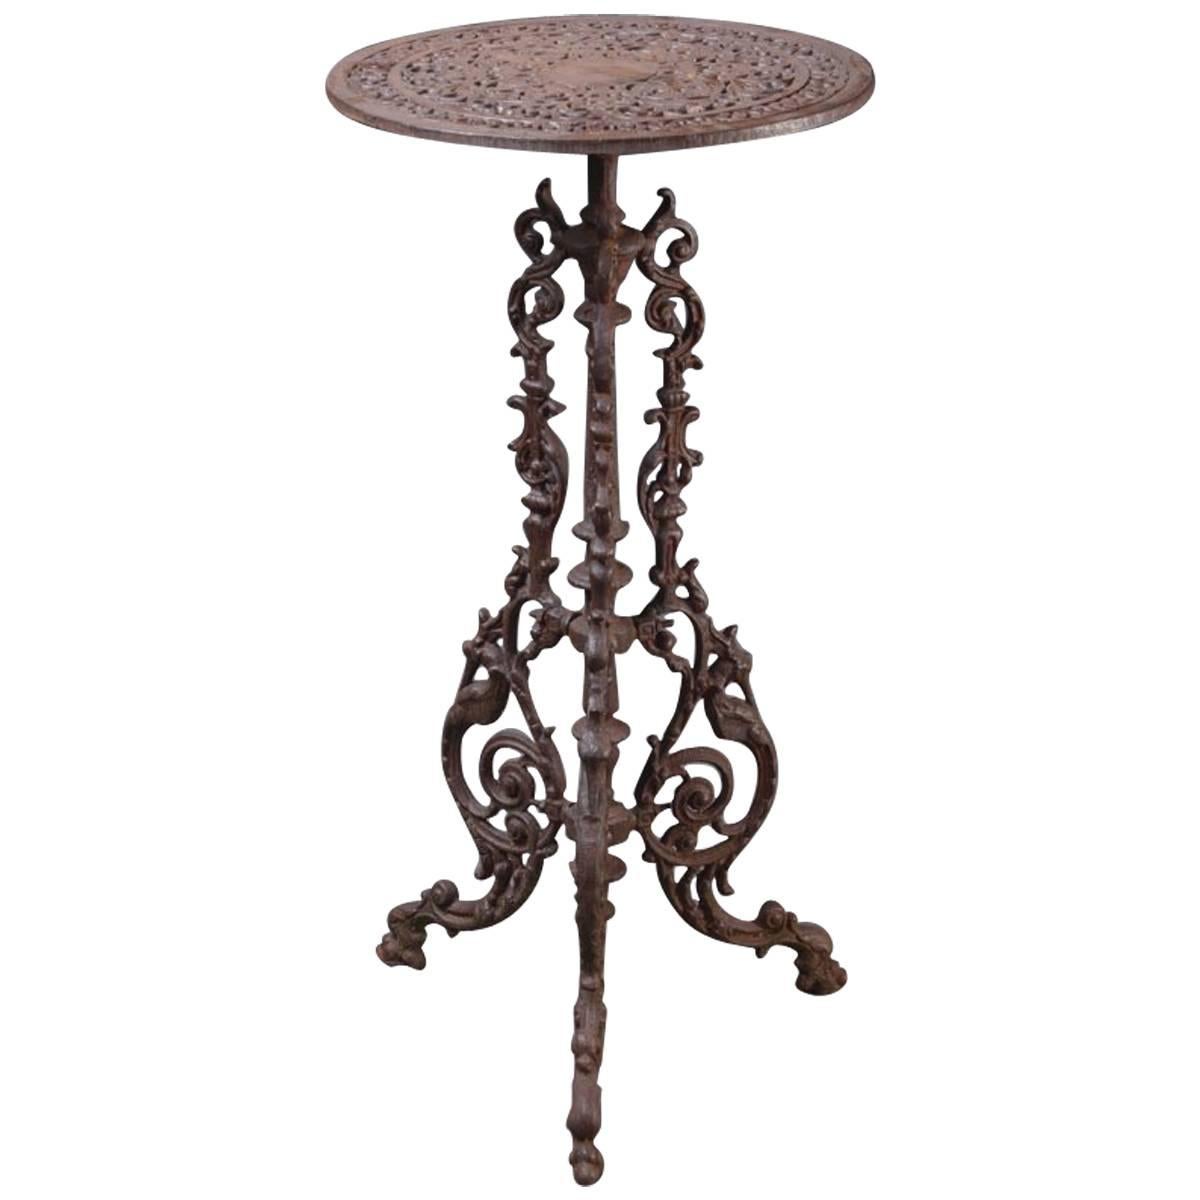 Small, Round Garden Table in the Style of the End of 19th Century, Cast Iron